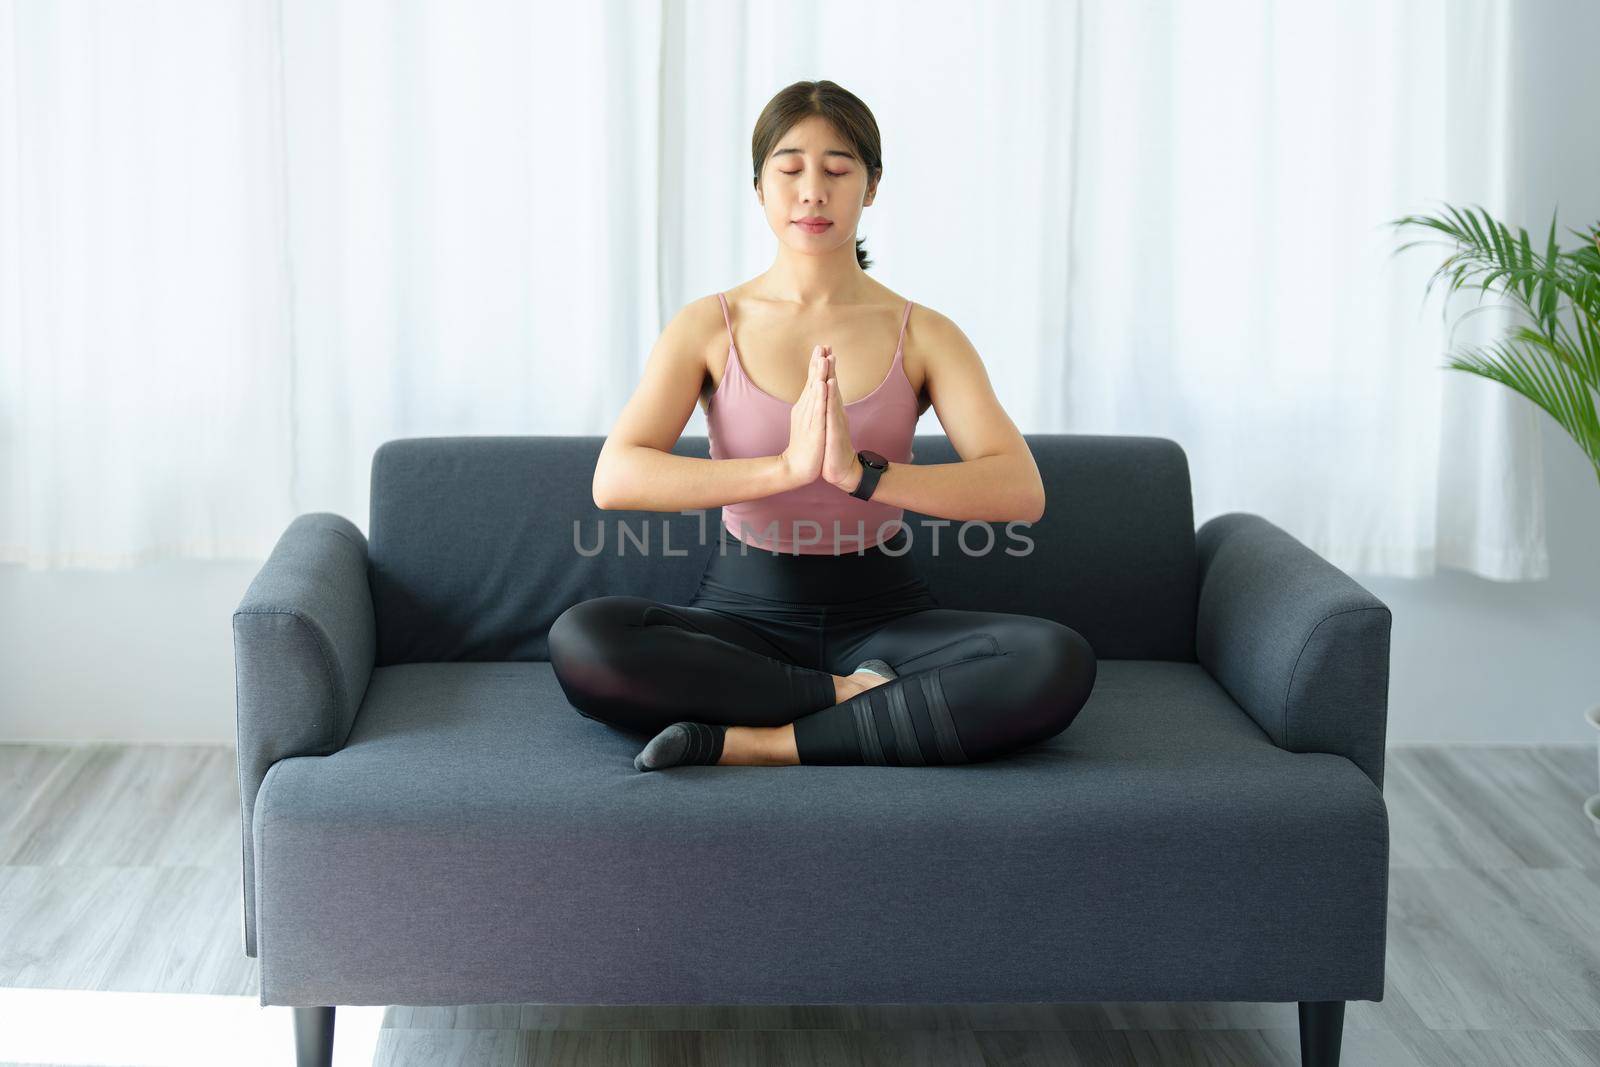 stress relief, muscle relaxation, breathing exercises, exercise, meditation, portrait of Young Asian woman relaxing her body from office work by practicing yoga by watching online tutorials. by Manastrong